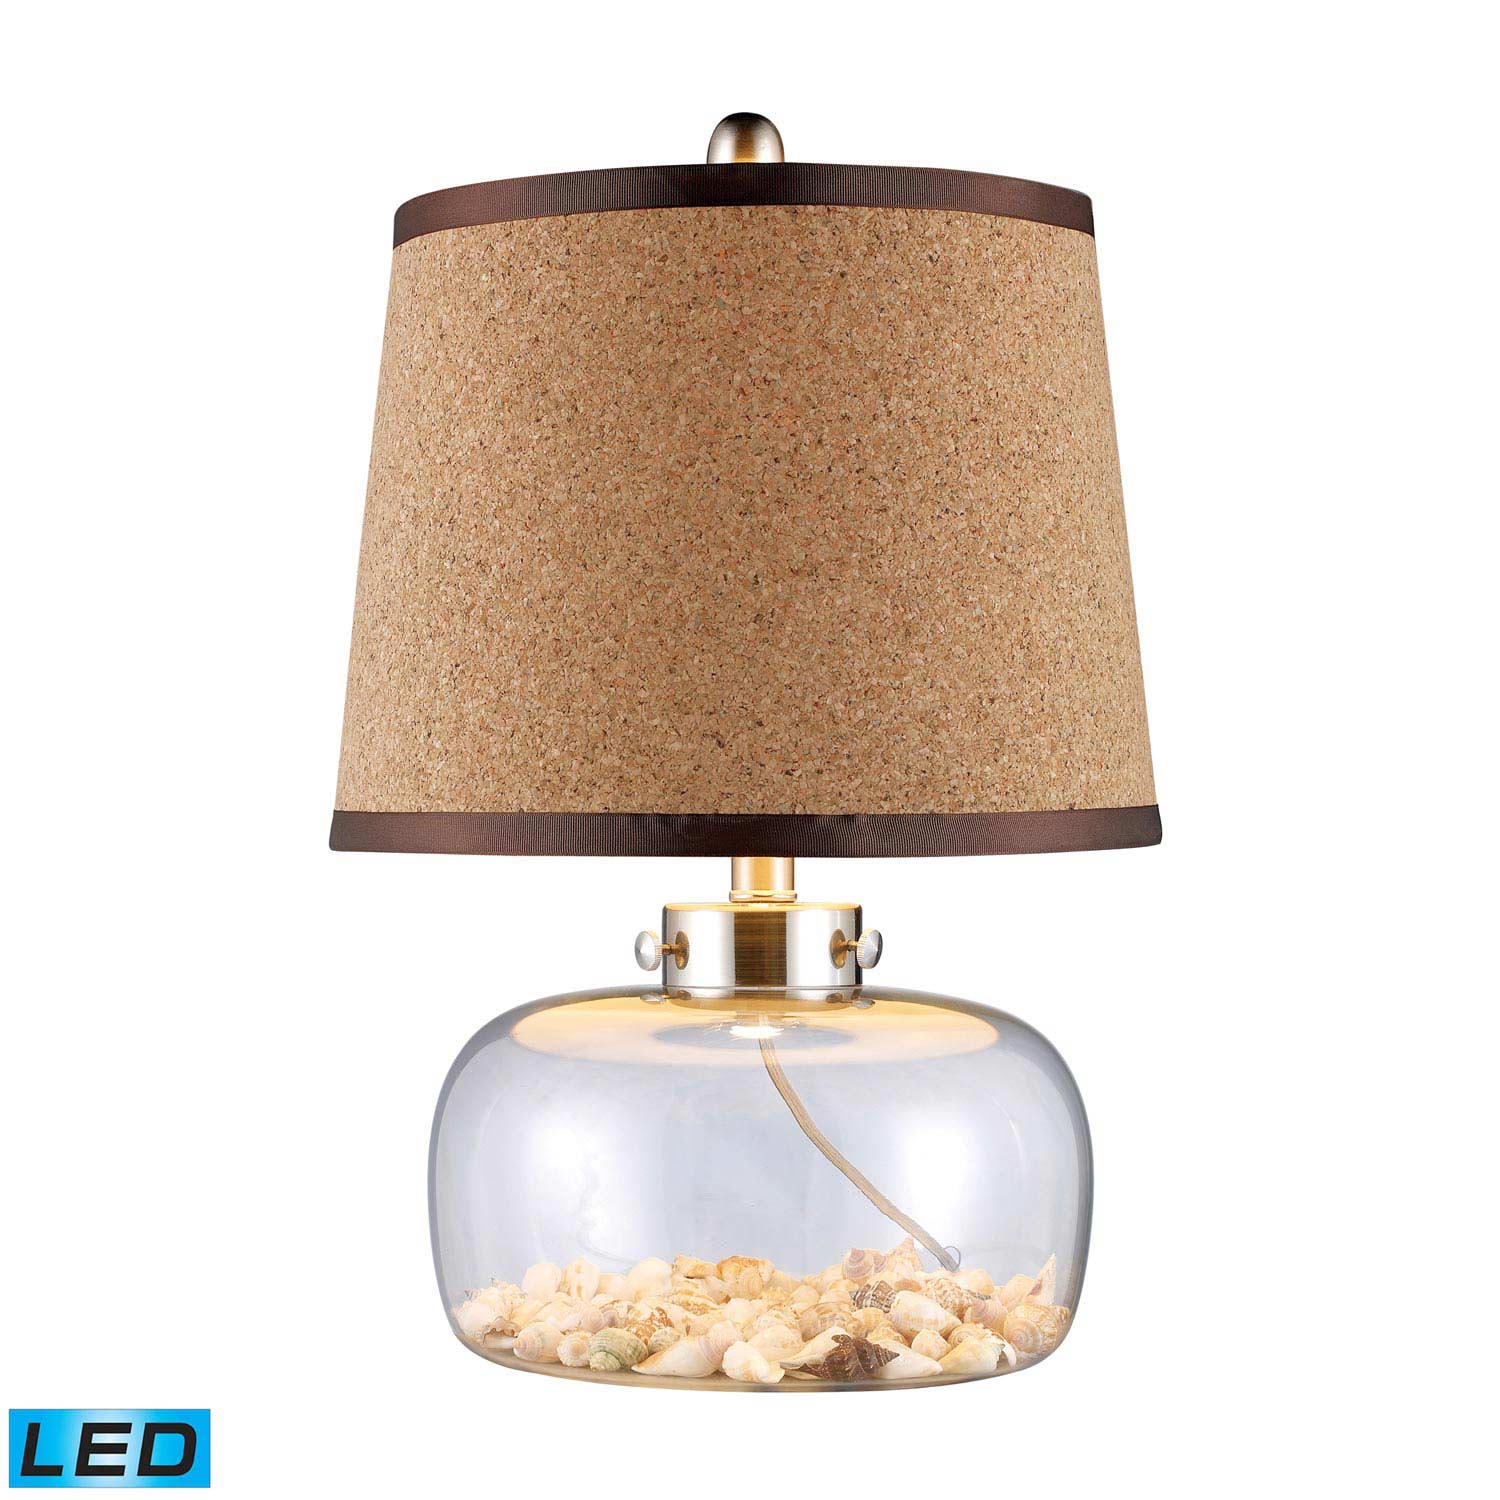 Elk Lighting D1981-LED Margate Table Lamp - Clear Glass and Shells